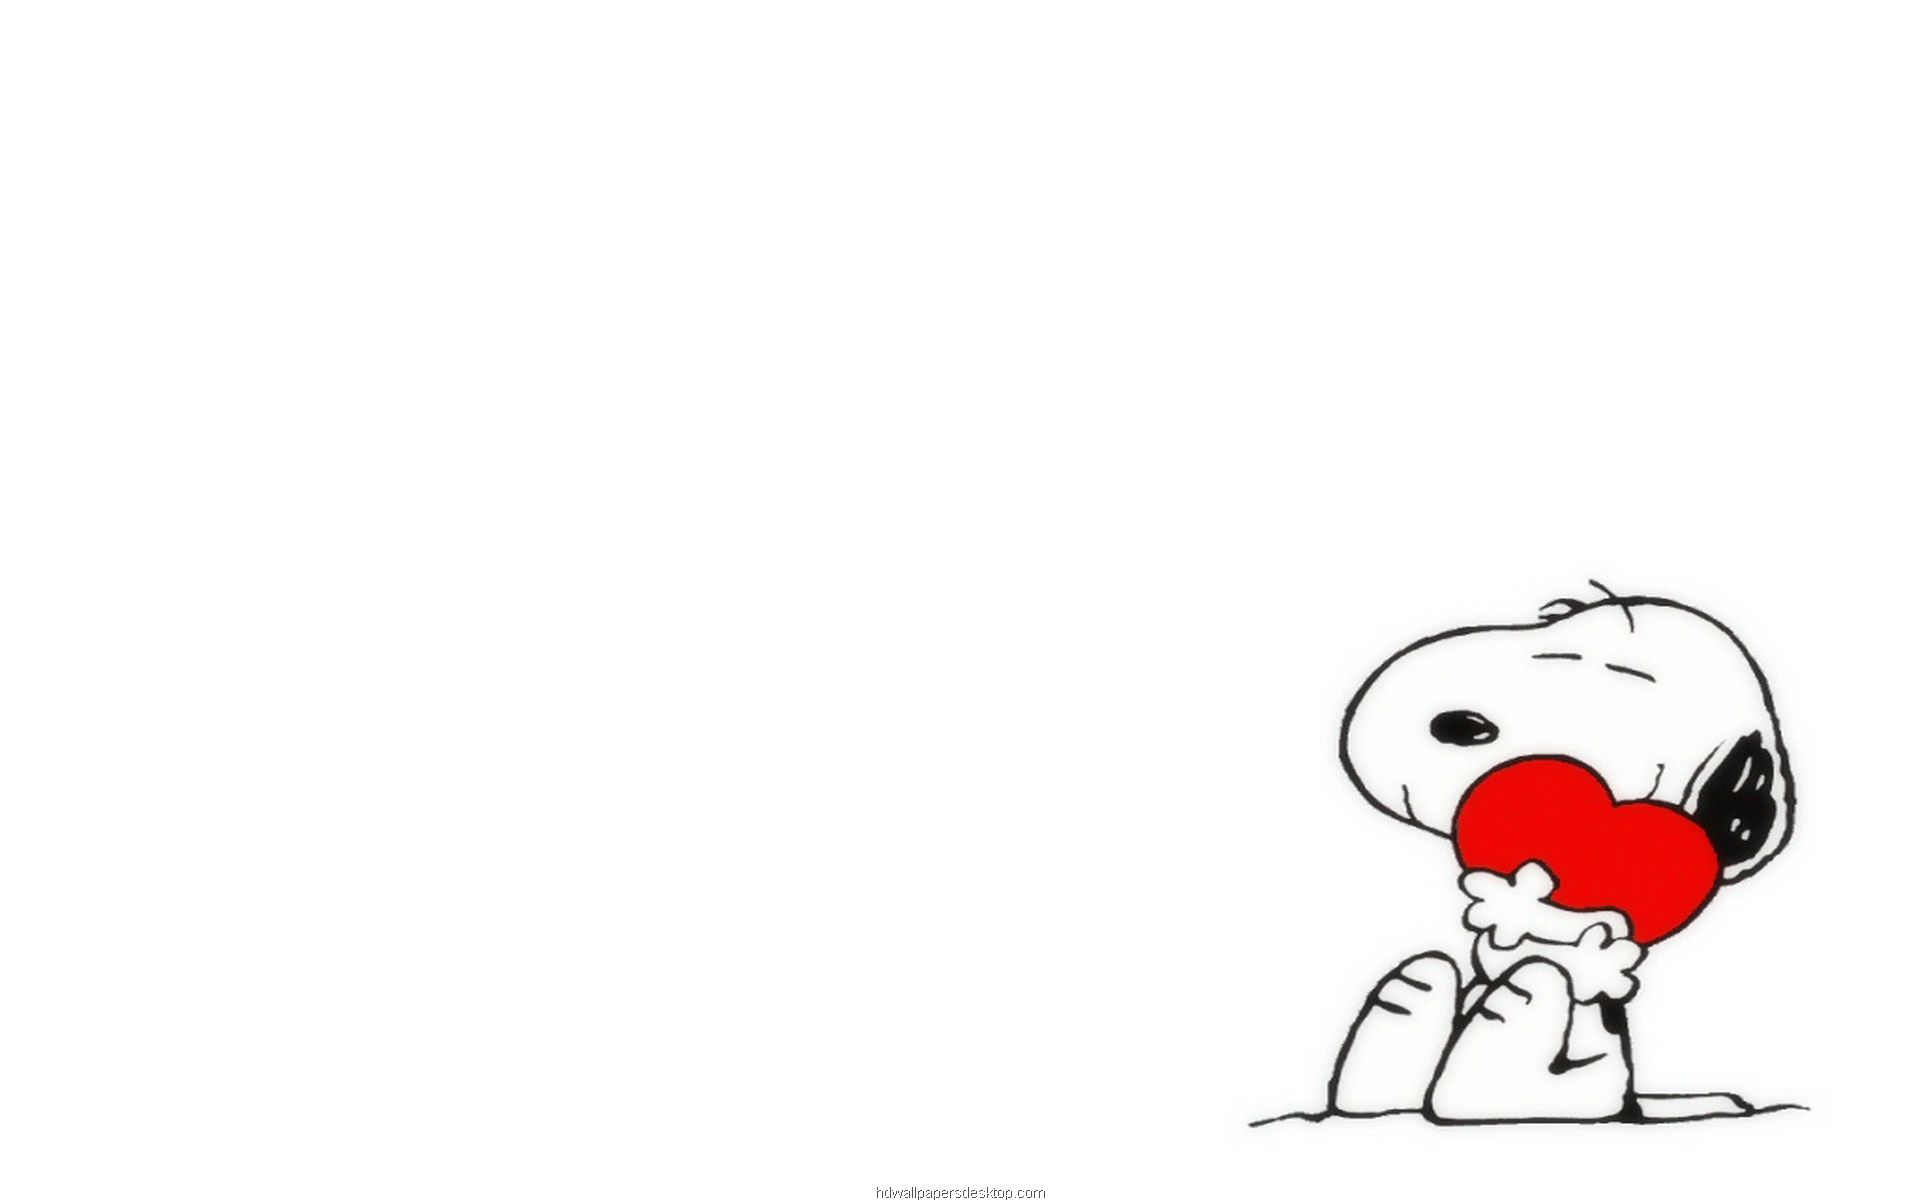 Top 15] Cute Snoopy wallpaper and Theme for Windows 8 | All for ...